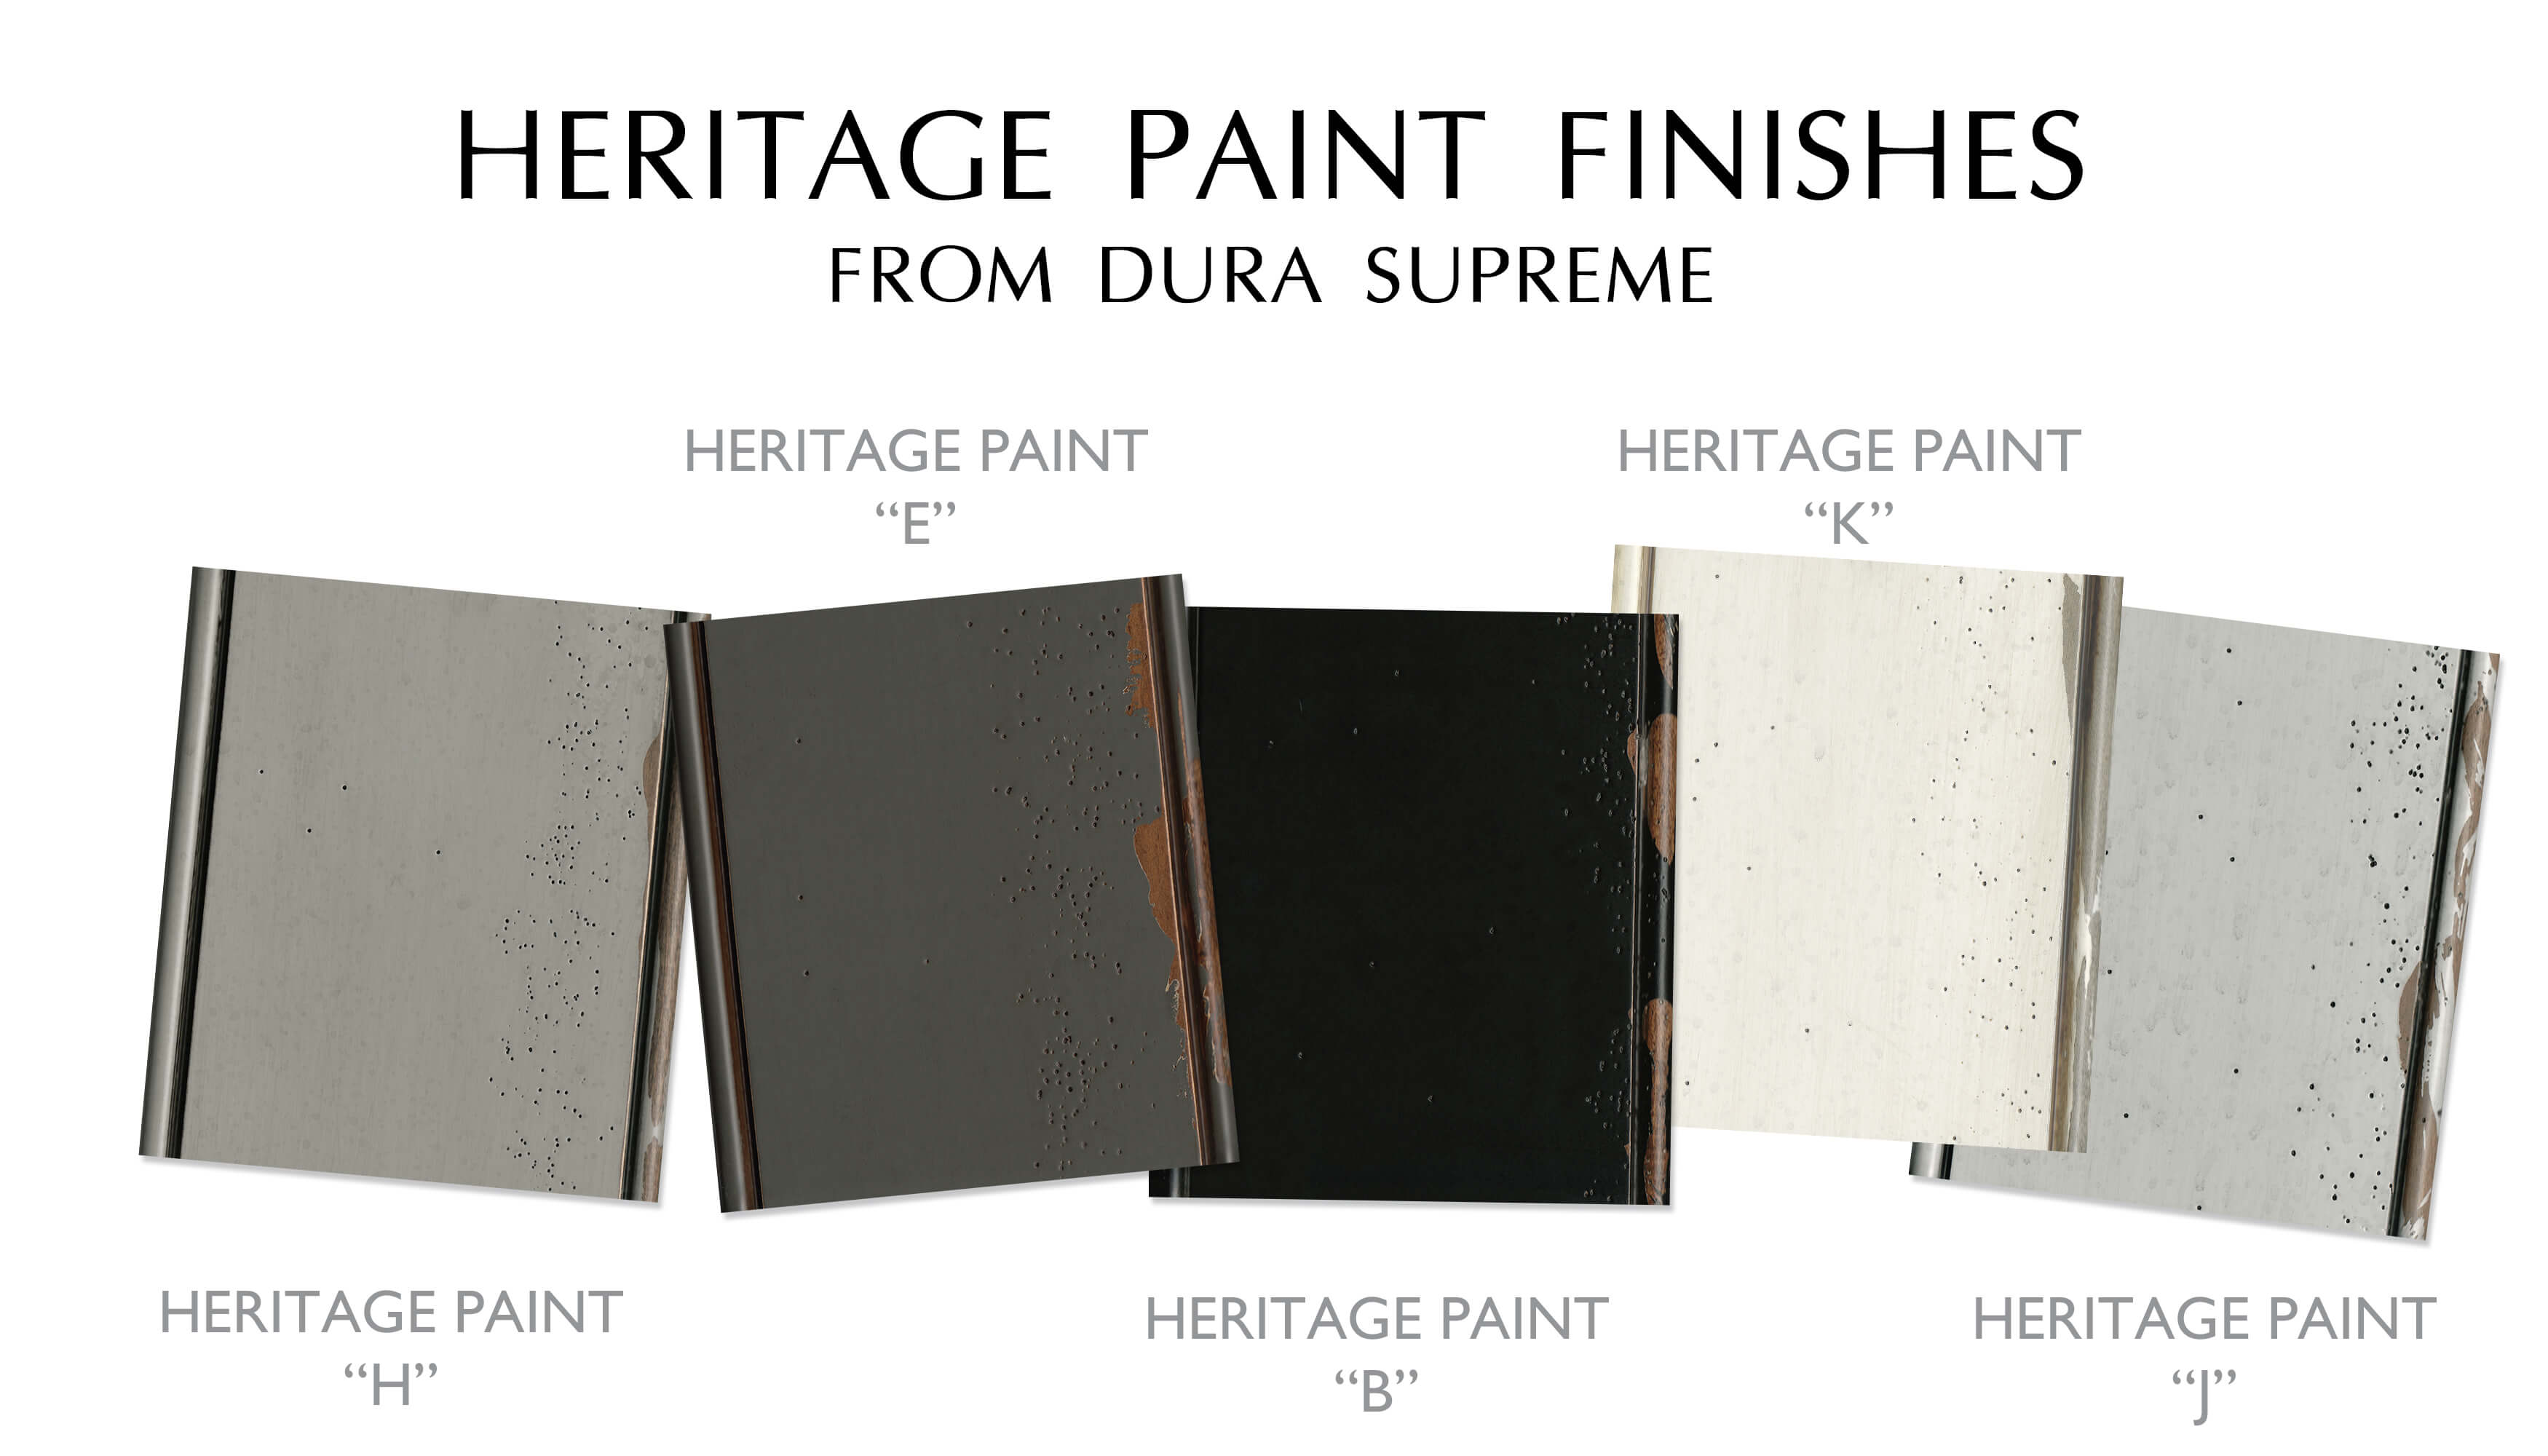 Dura Supreme's Heritage Paint Collection of Distressed Painted Cabinet Finishes